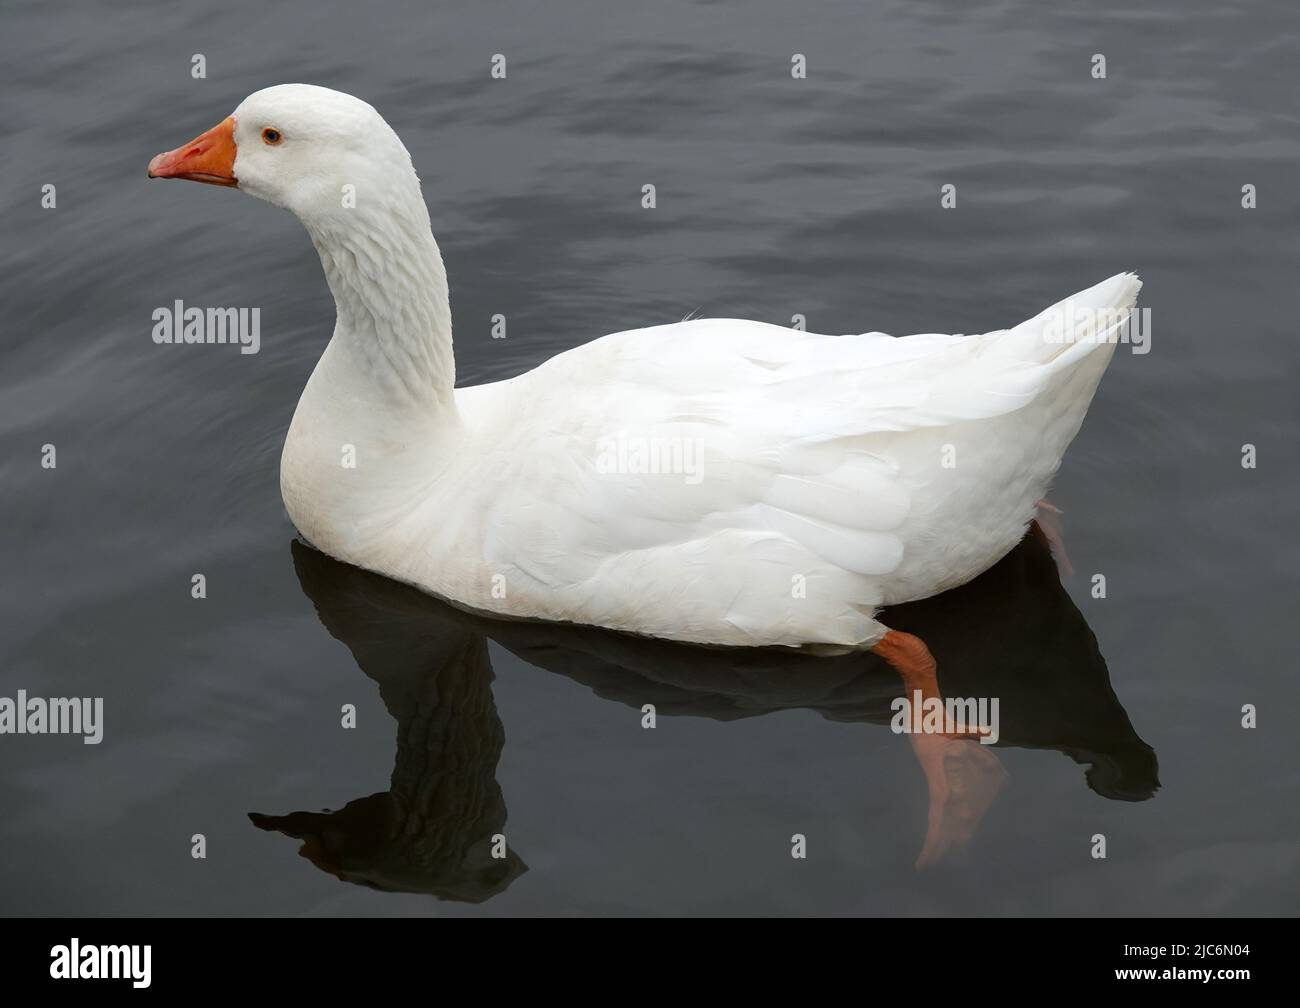 A white goose, swimming in clear dark water. One can see its paw below the surface of the water. Stock Photo